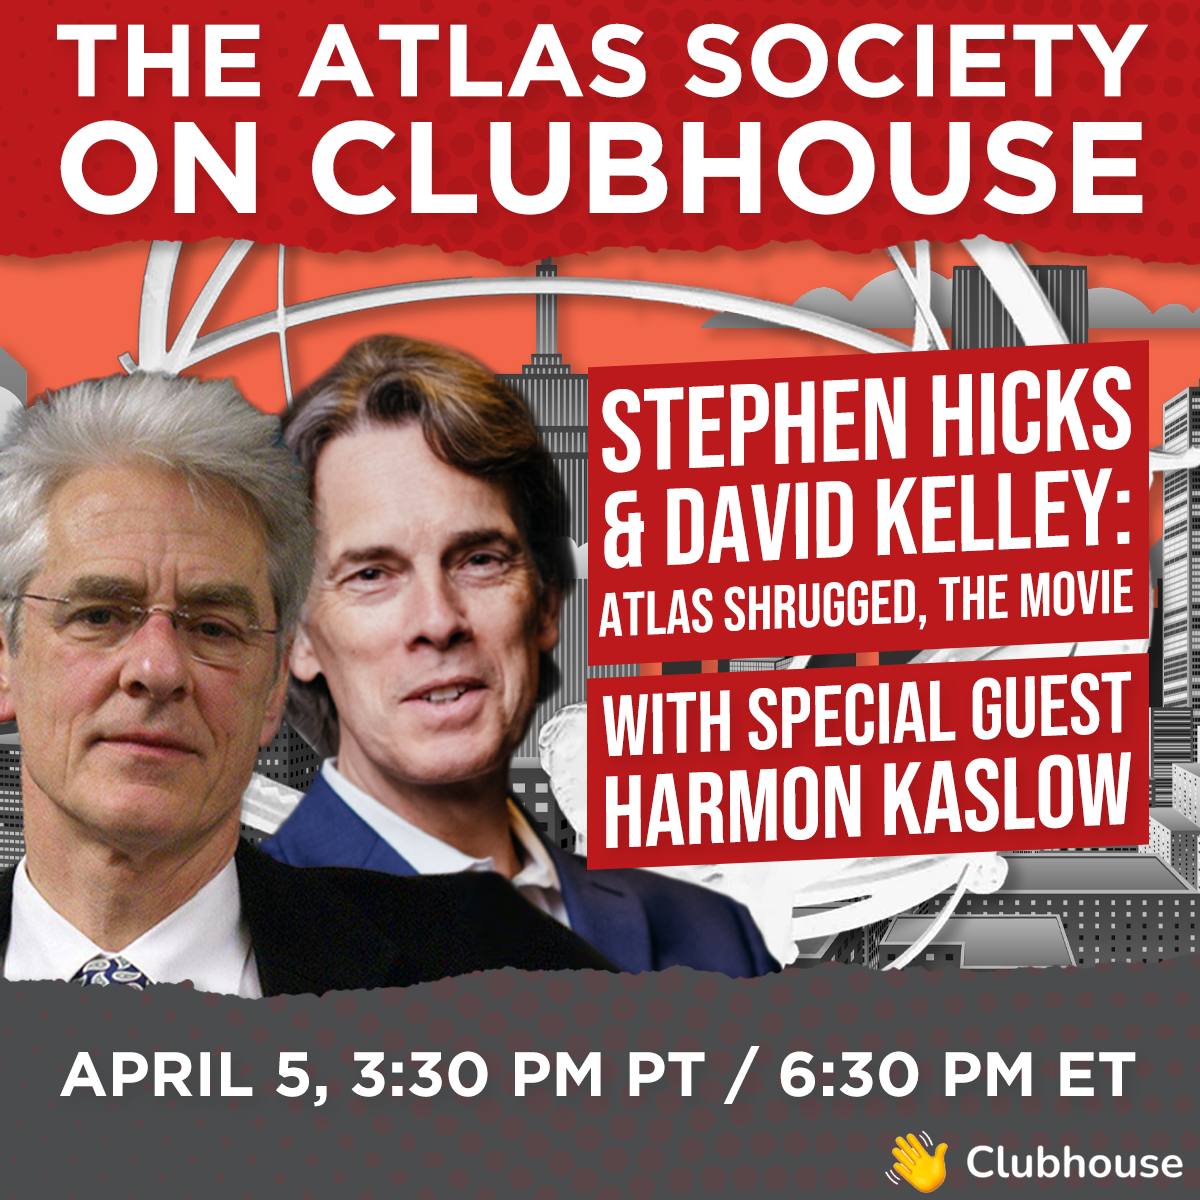 Stephen Hicks & David Kelley "Atlas Shrugged, The Movie with Special Guest Harmon Kaslow"